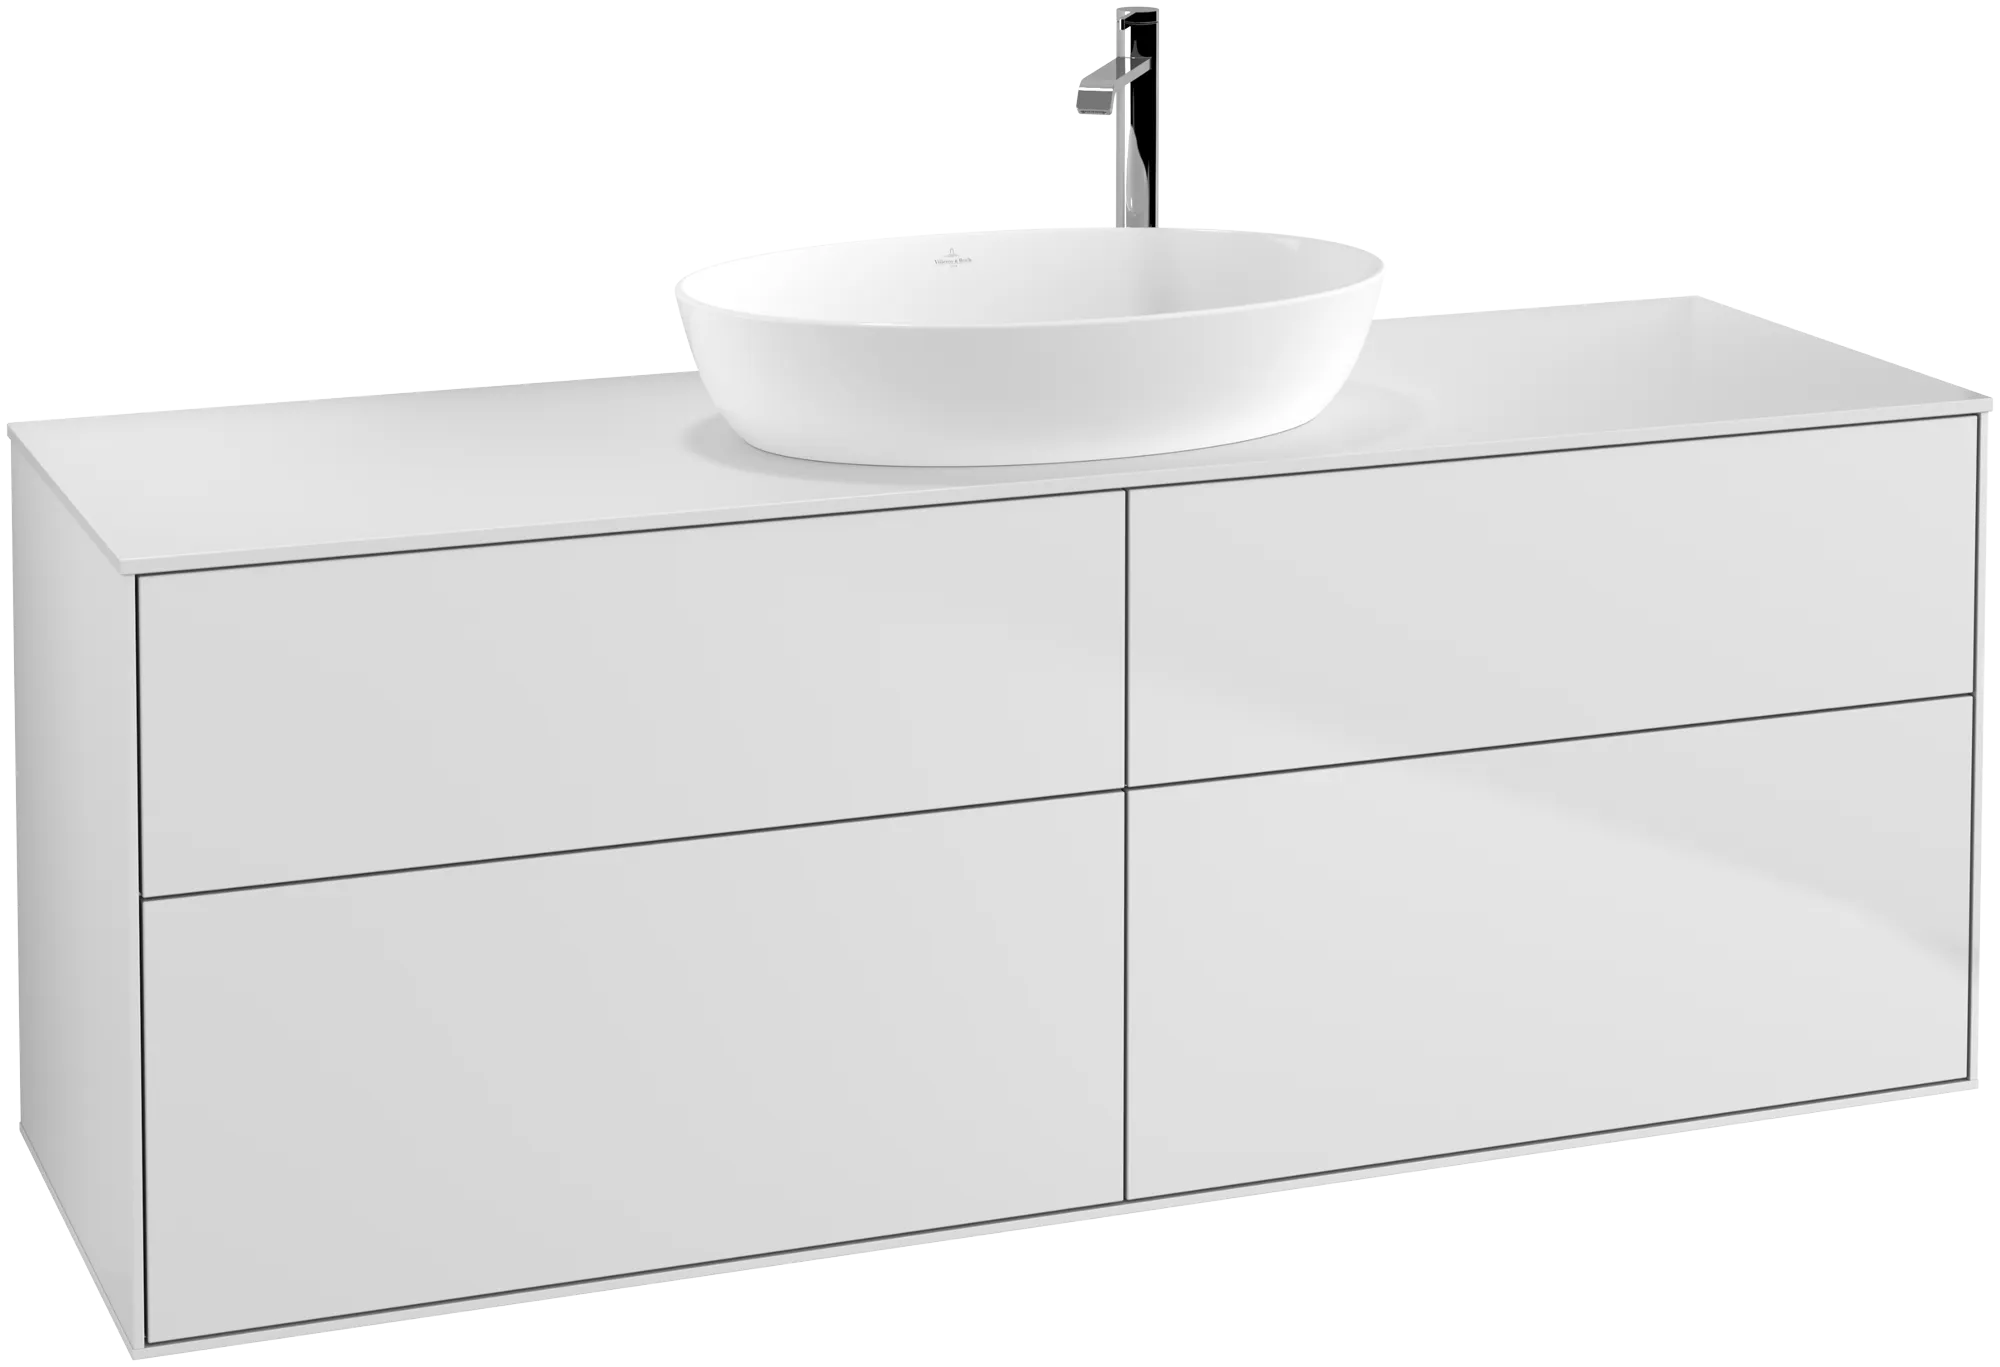 Picture of VILLEROY BOCH Finion Vanity unit, with lighting, 4 pull-out compartments, 1600 x 603 x 501 mm, White Matt Lacquer / Glass White Matt #G97100MT